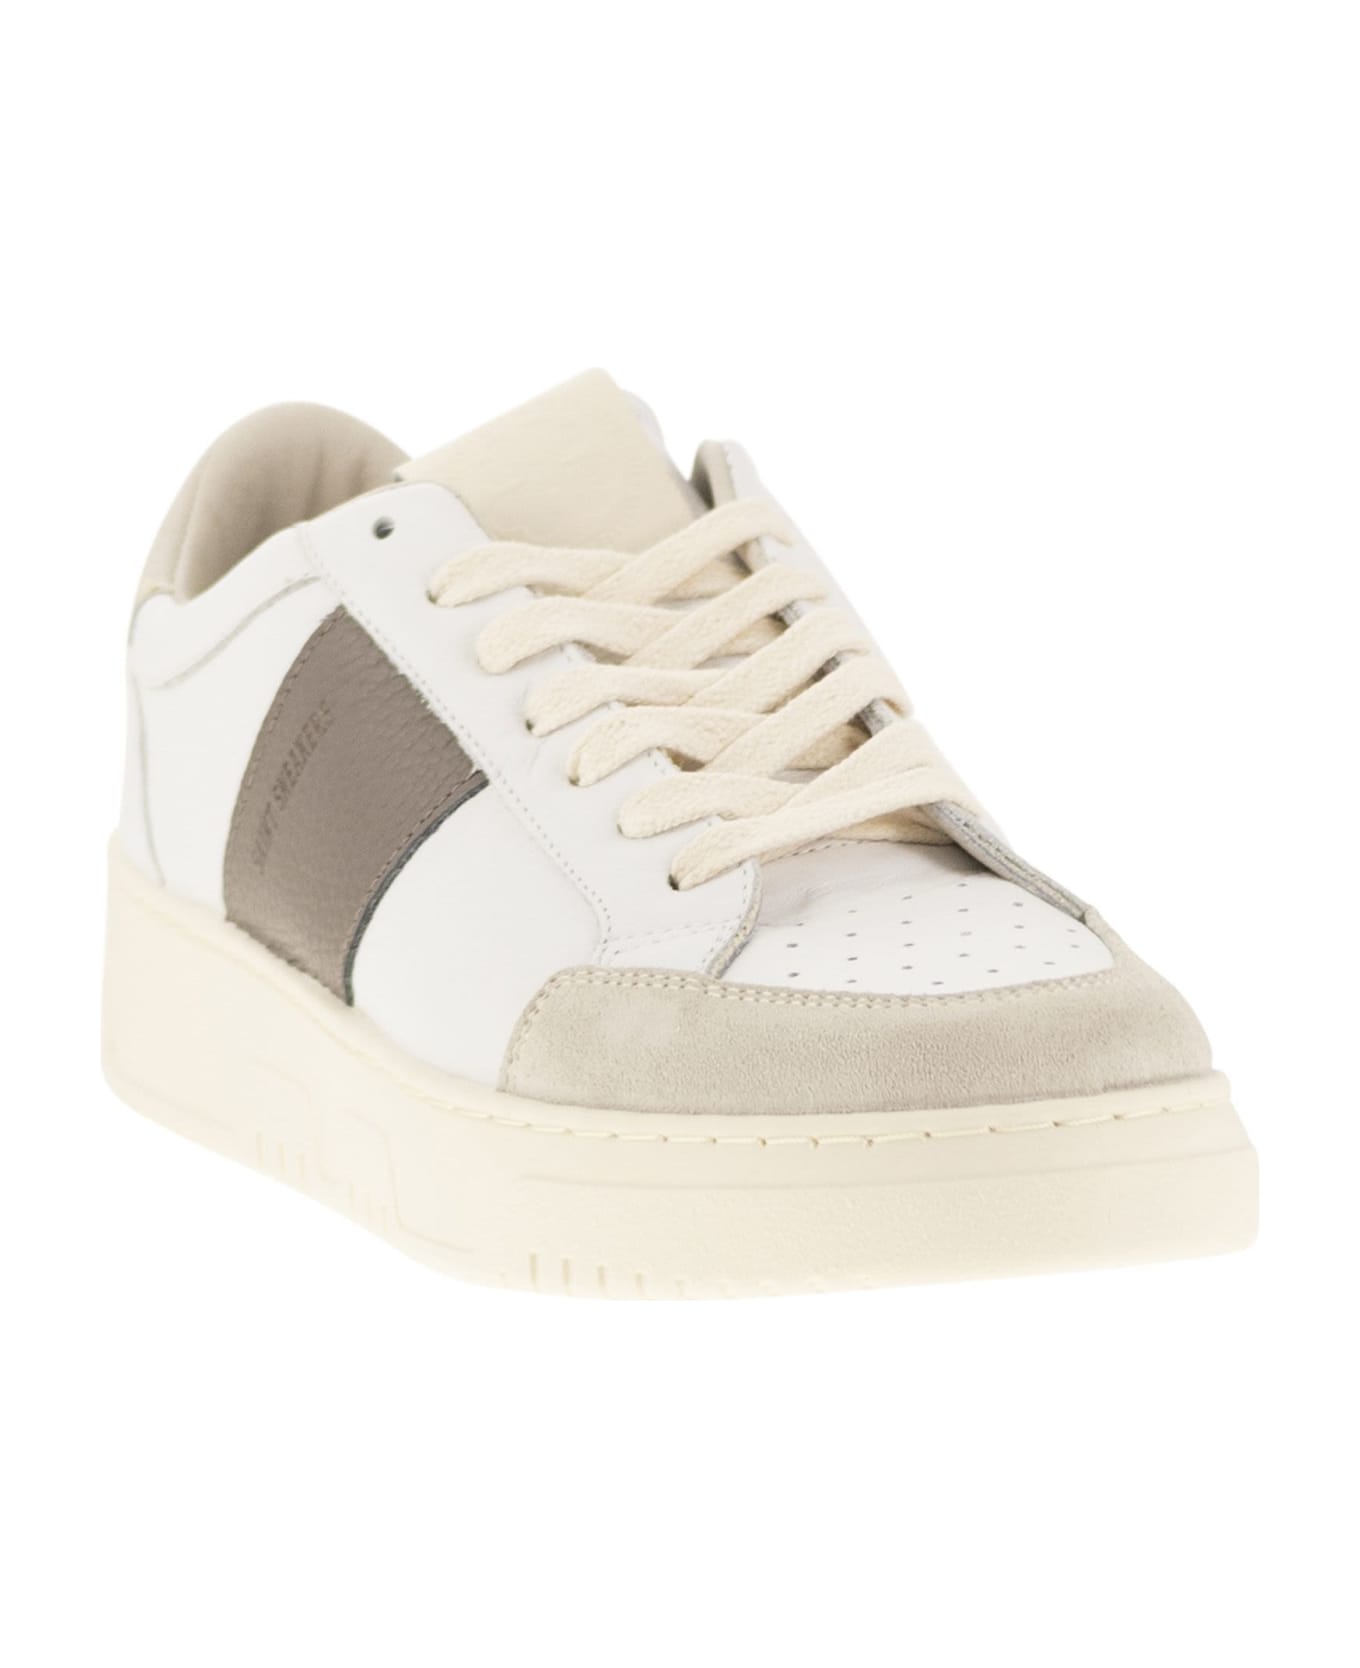 Saint Sneakers Sail - Leather And Suede Trainers - White/grey スニーカー